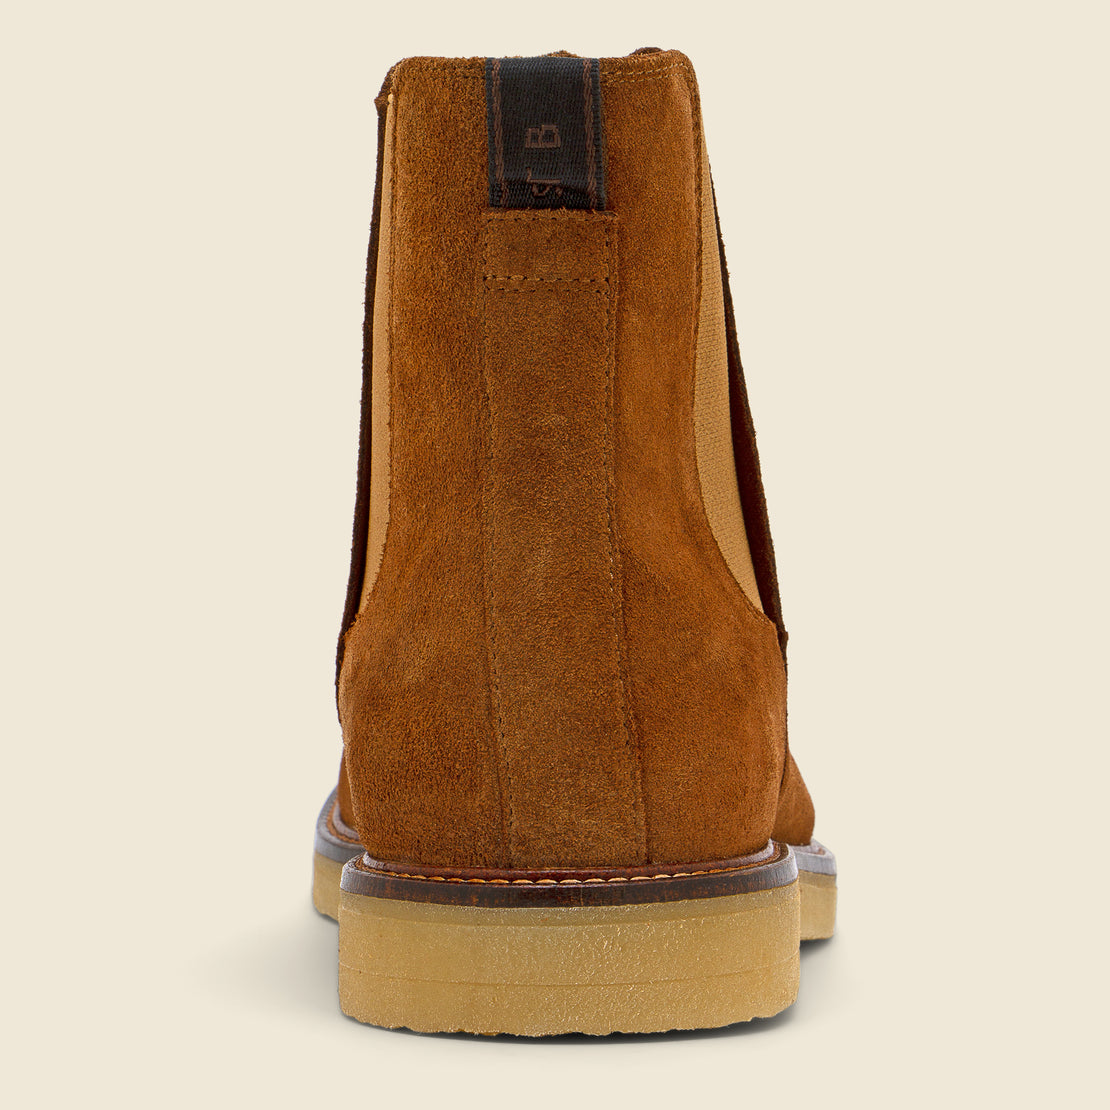 Kip Suede Chelsea Boot - Tan - Shoe the Bear - STAG Provisions - Shoes - Boots / Chukkas